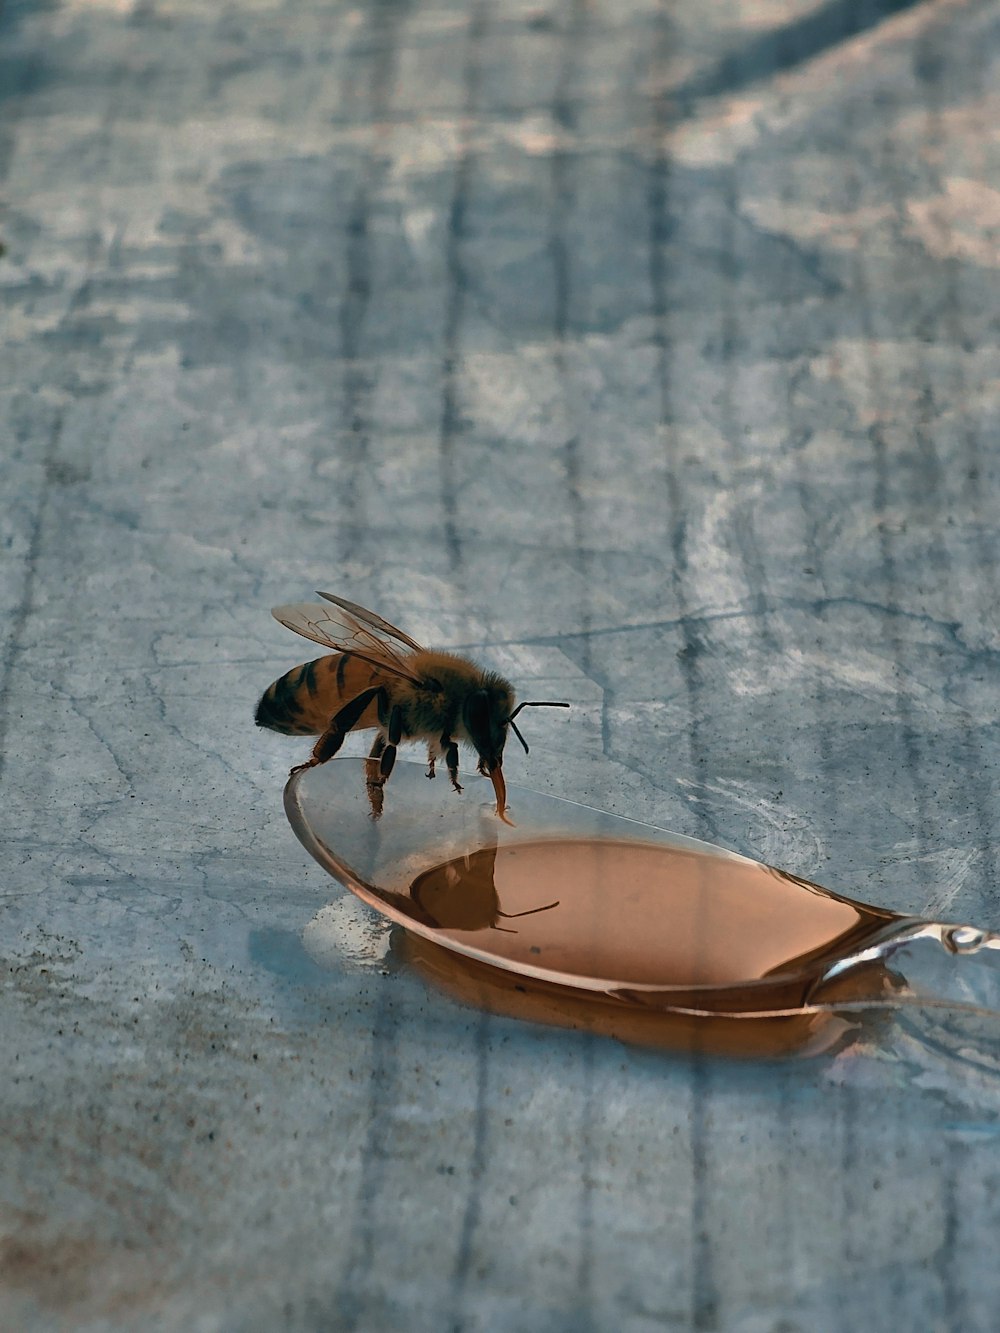 a bee drinking water from a metal bowl